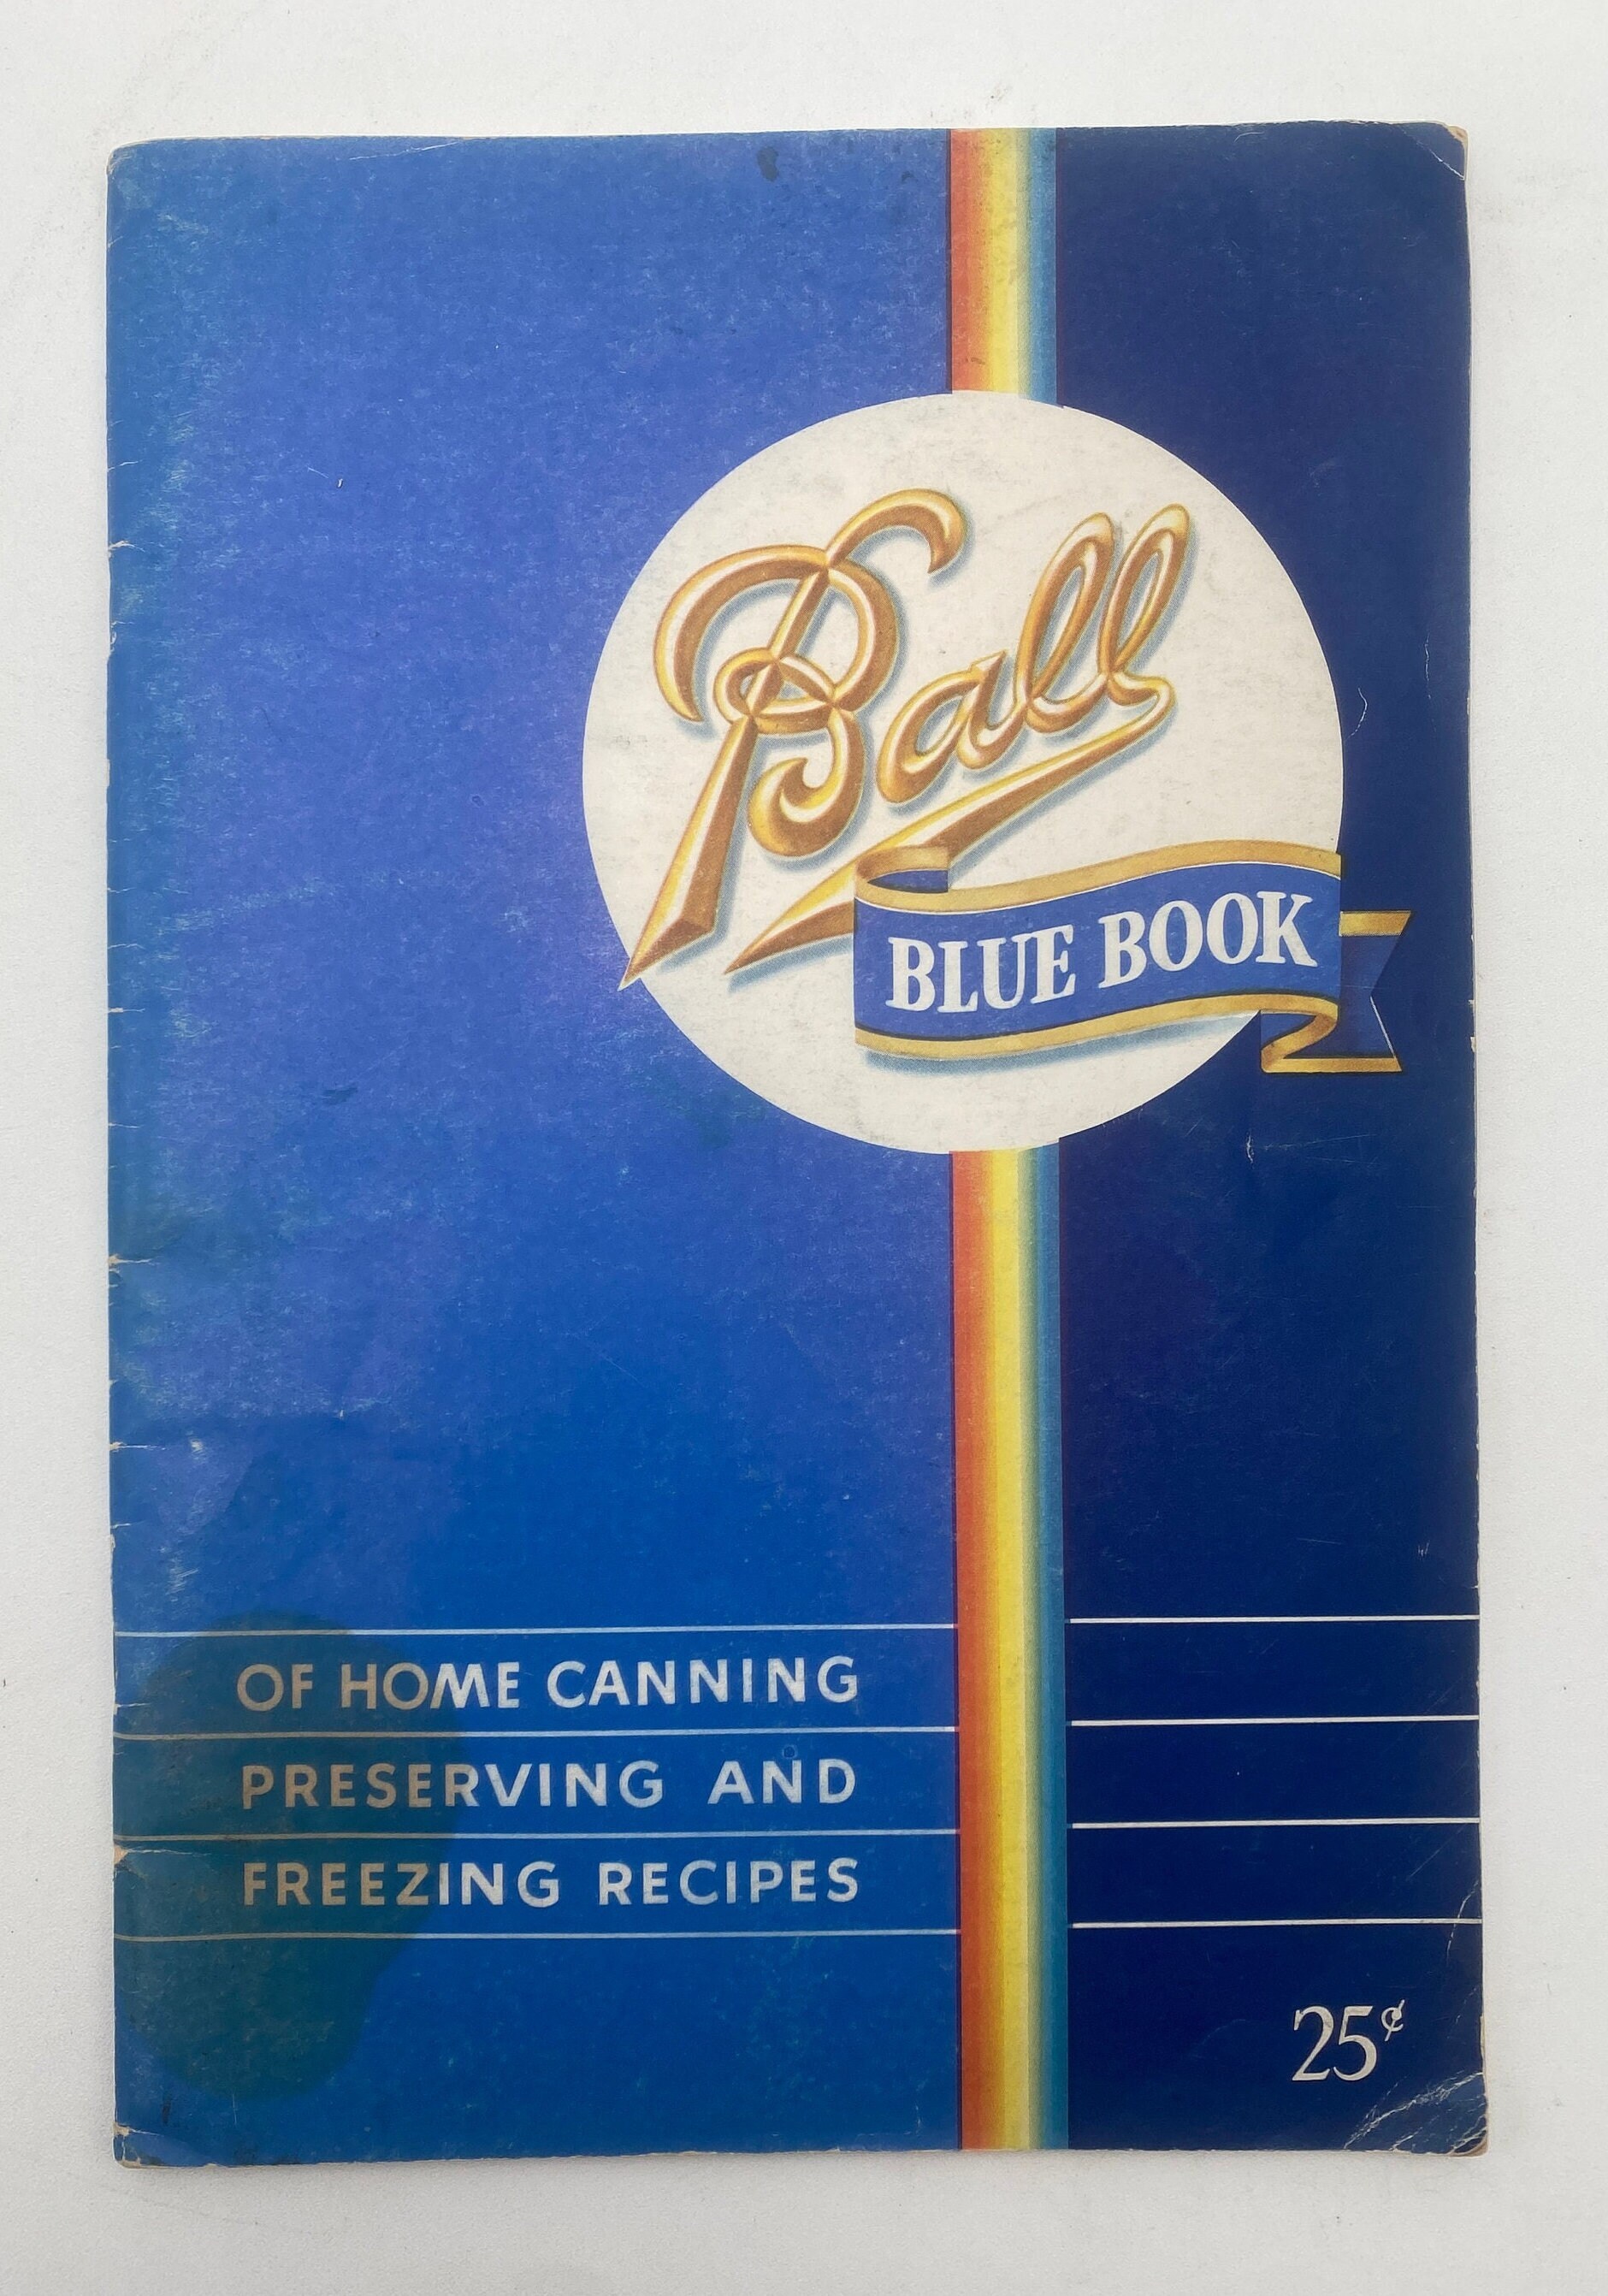 Ball Blue Book of Home Canning Preserving and Freezing Edition